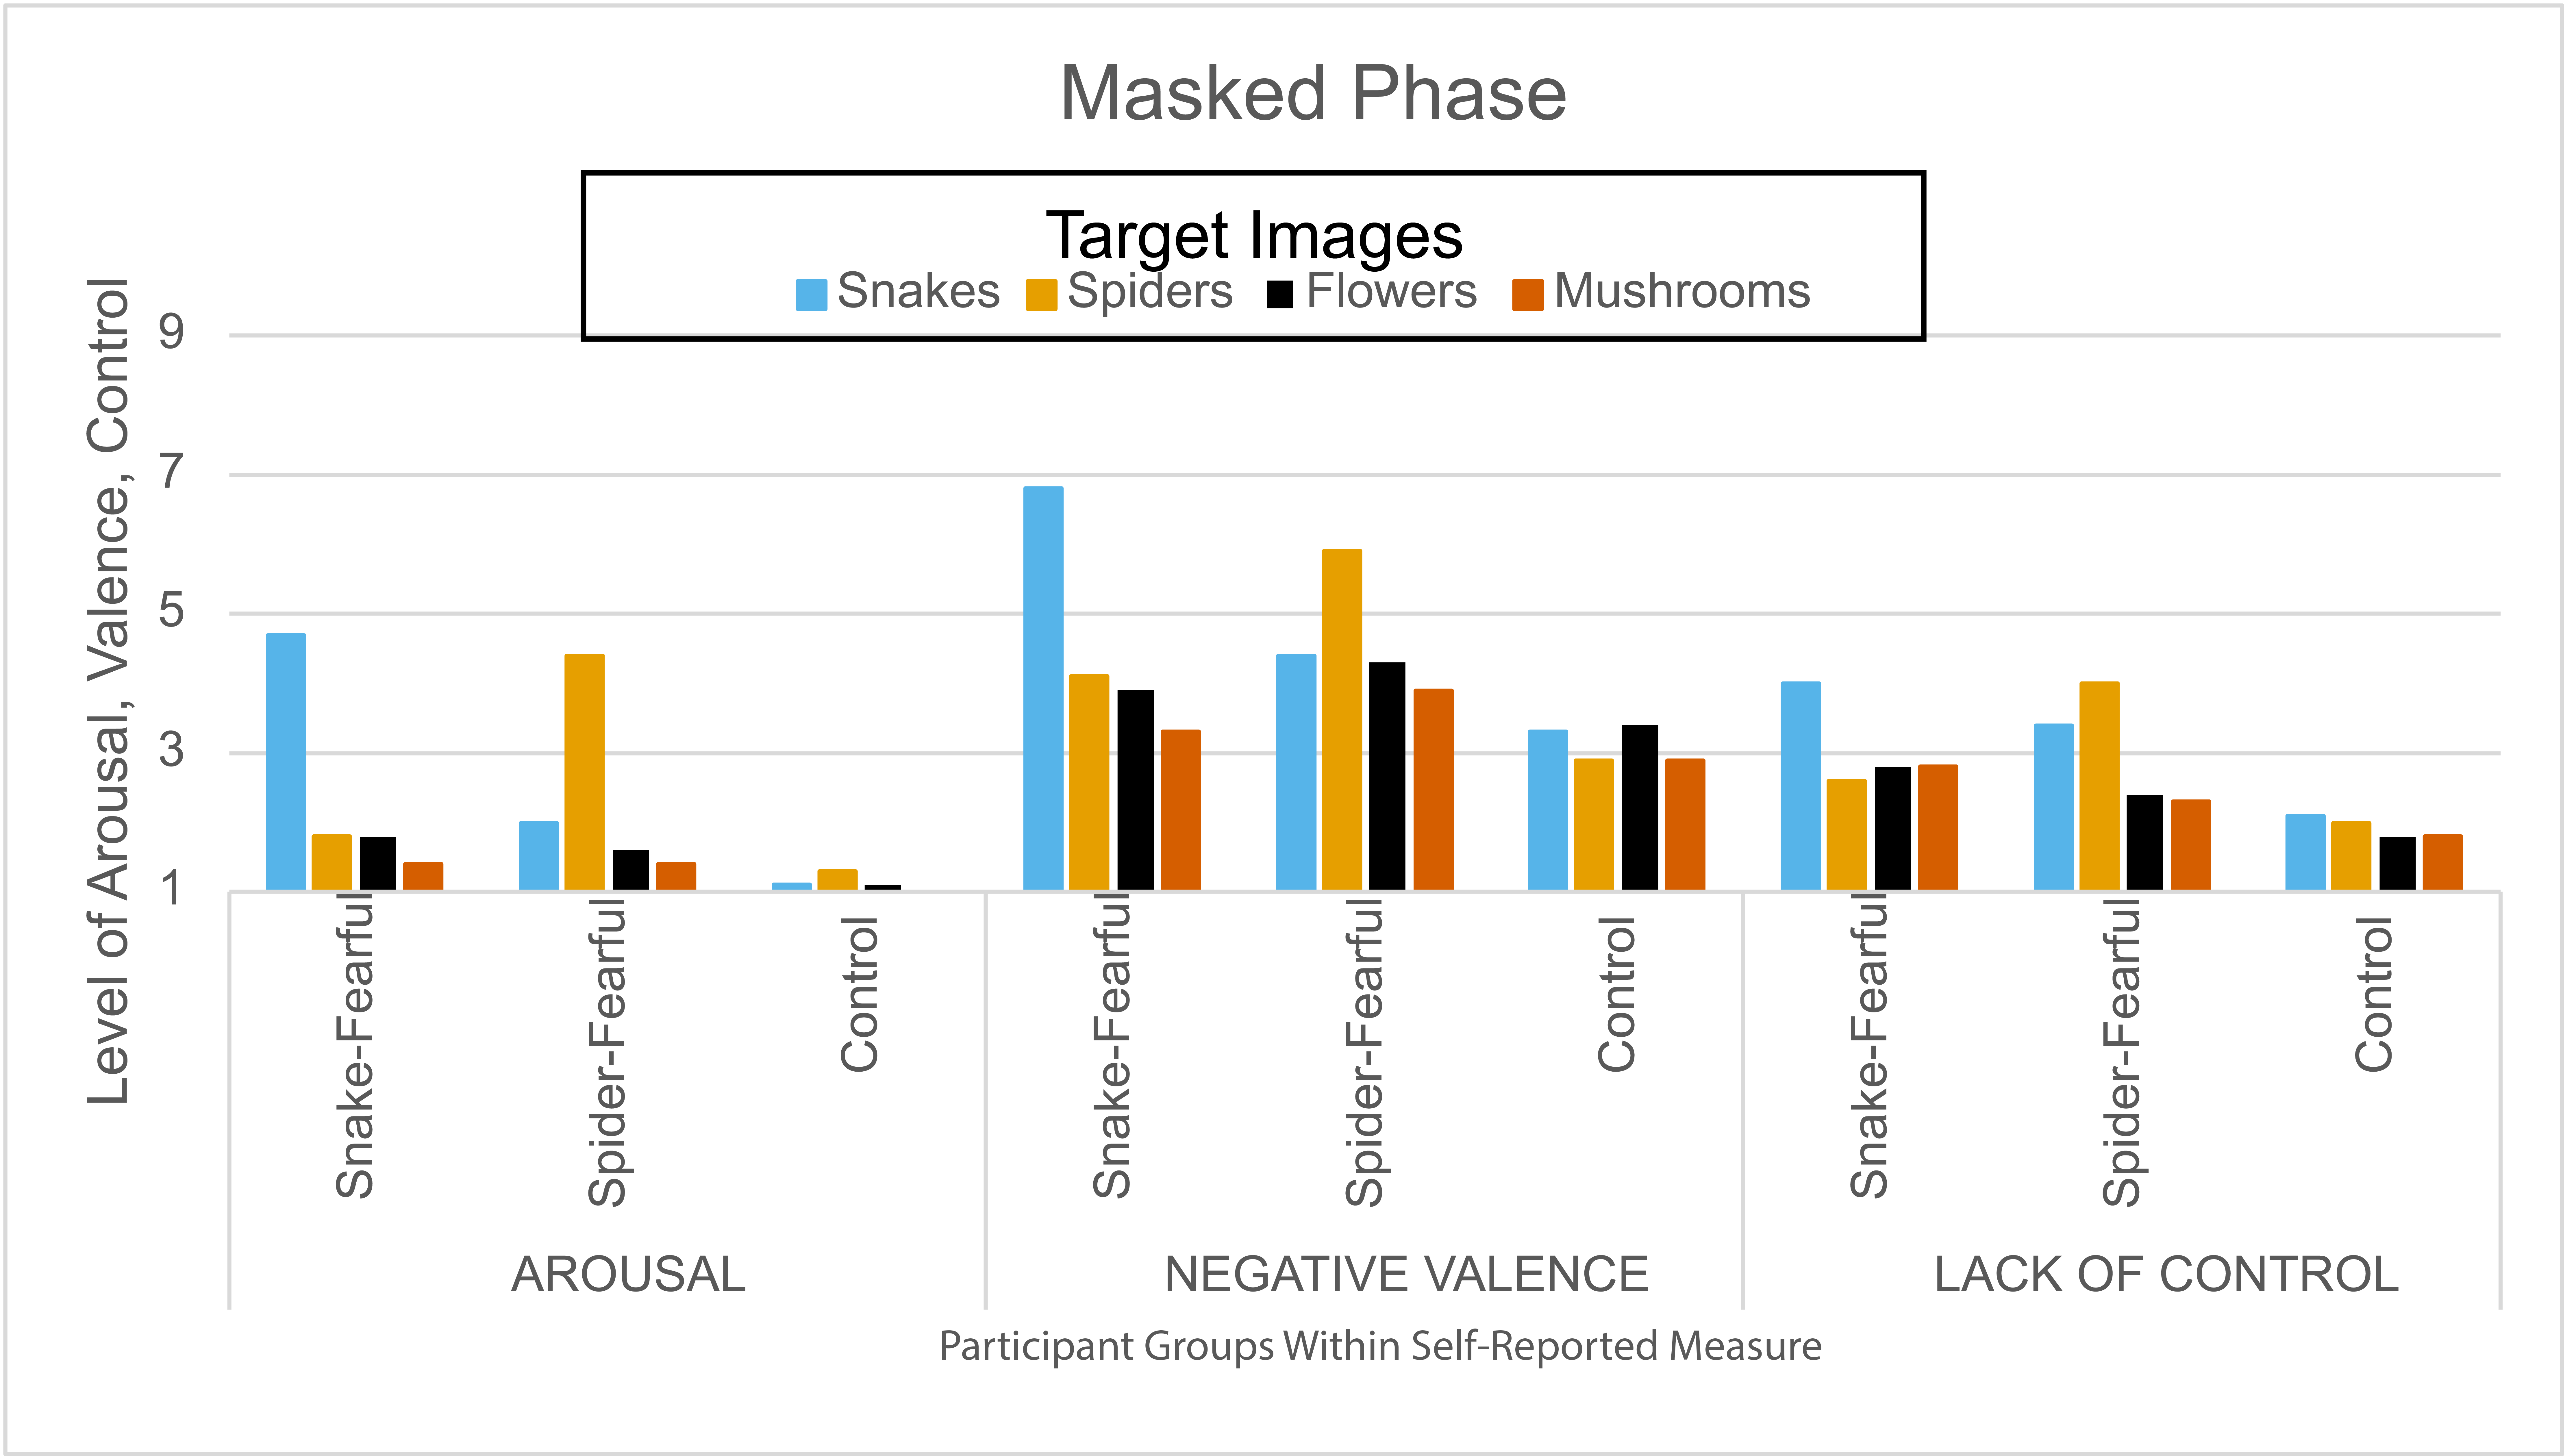 One graph for masked phase. The graph has 3 sections of 12 bars (36 bars total). Within each section are 3 groups, each group has 4 bars. The 4 bars in each group are the same: Snakes (blue), Spiders (gold), Flowers (black), Mushrooms (orange). The three groups in the sections are all consistent: Snake-fearful, spider-fearful, and control. The three sections are Arousal (left), Negative Valence (middle), Lack of control (right).